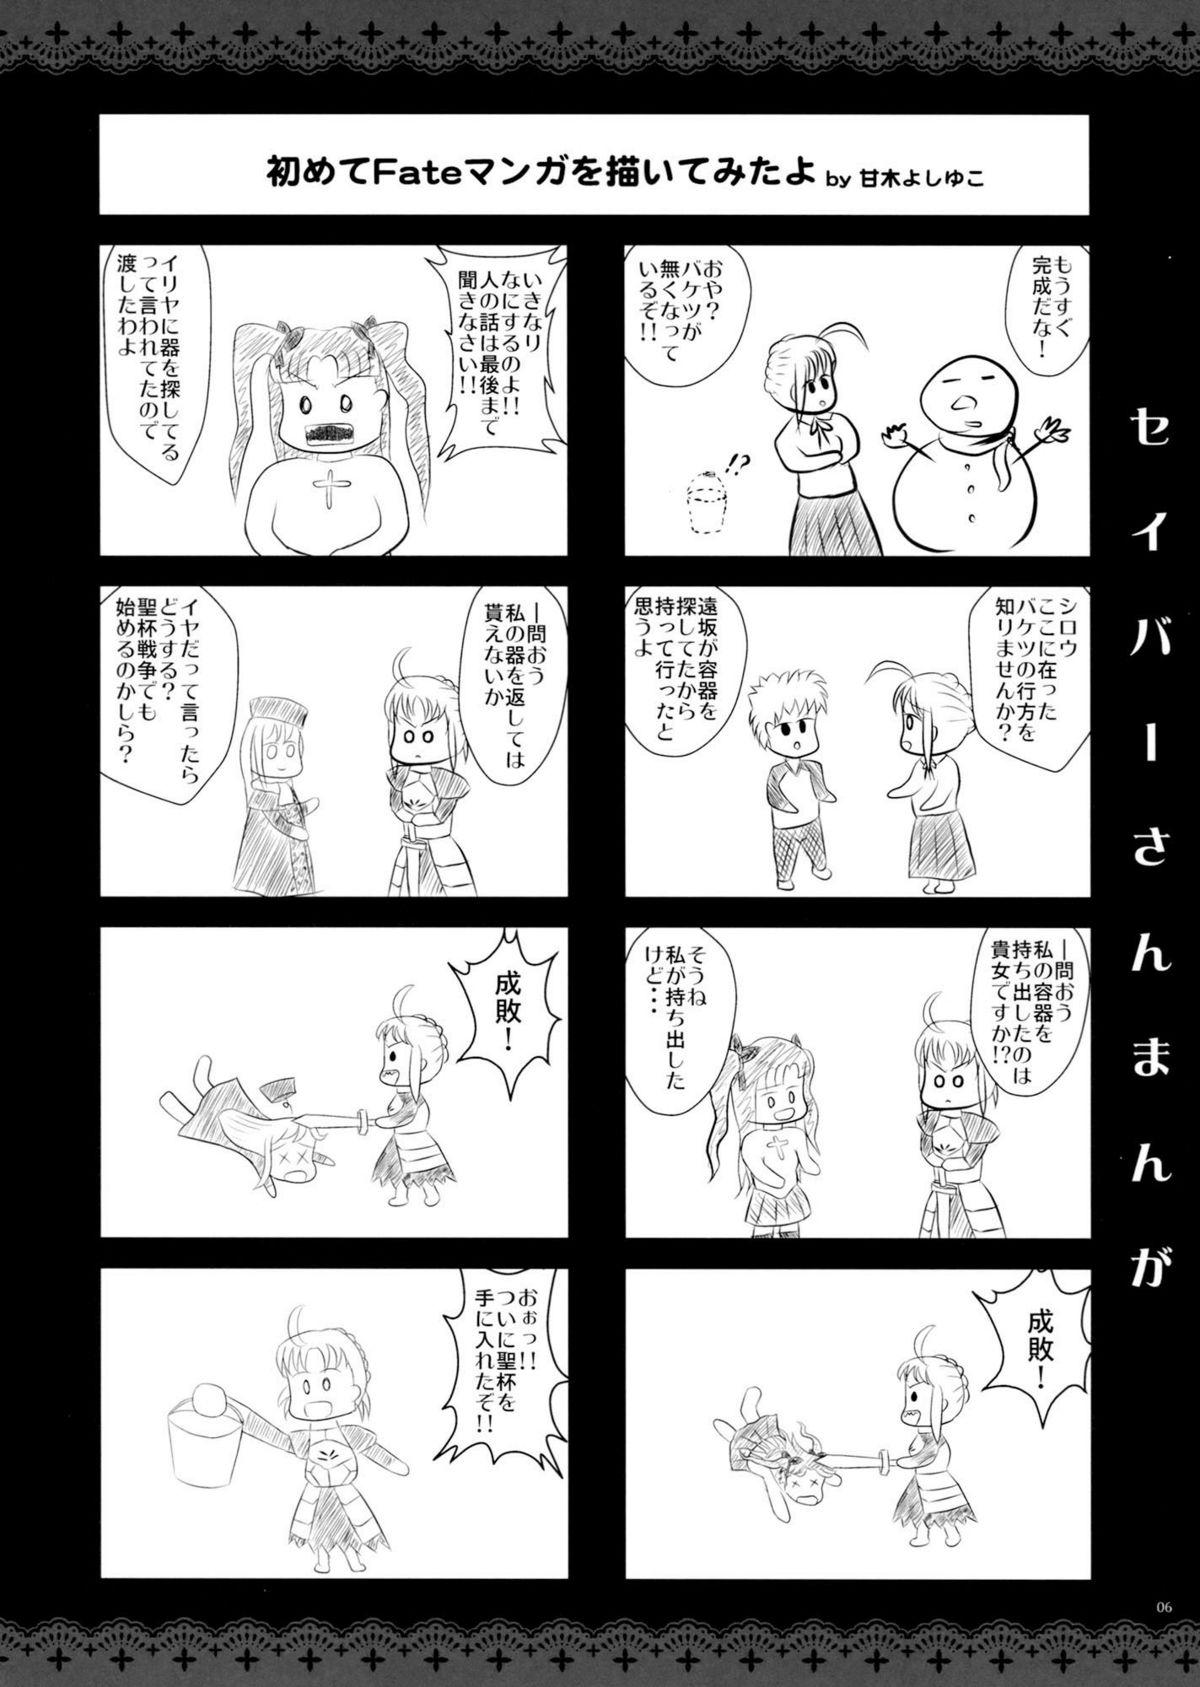 Asia GARIGARI 41 - Fate stay night Gay Reality - Page 5